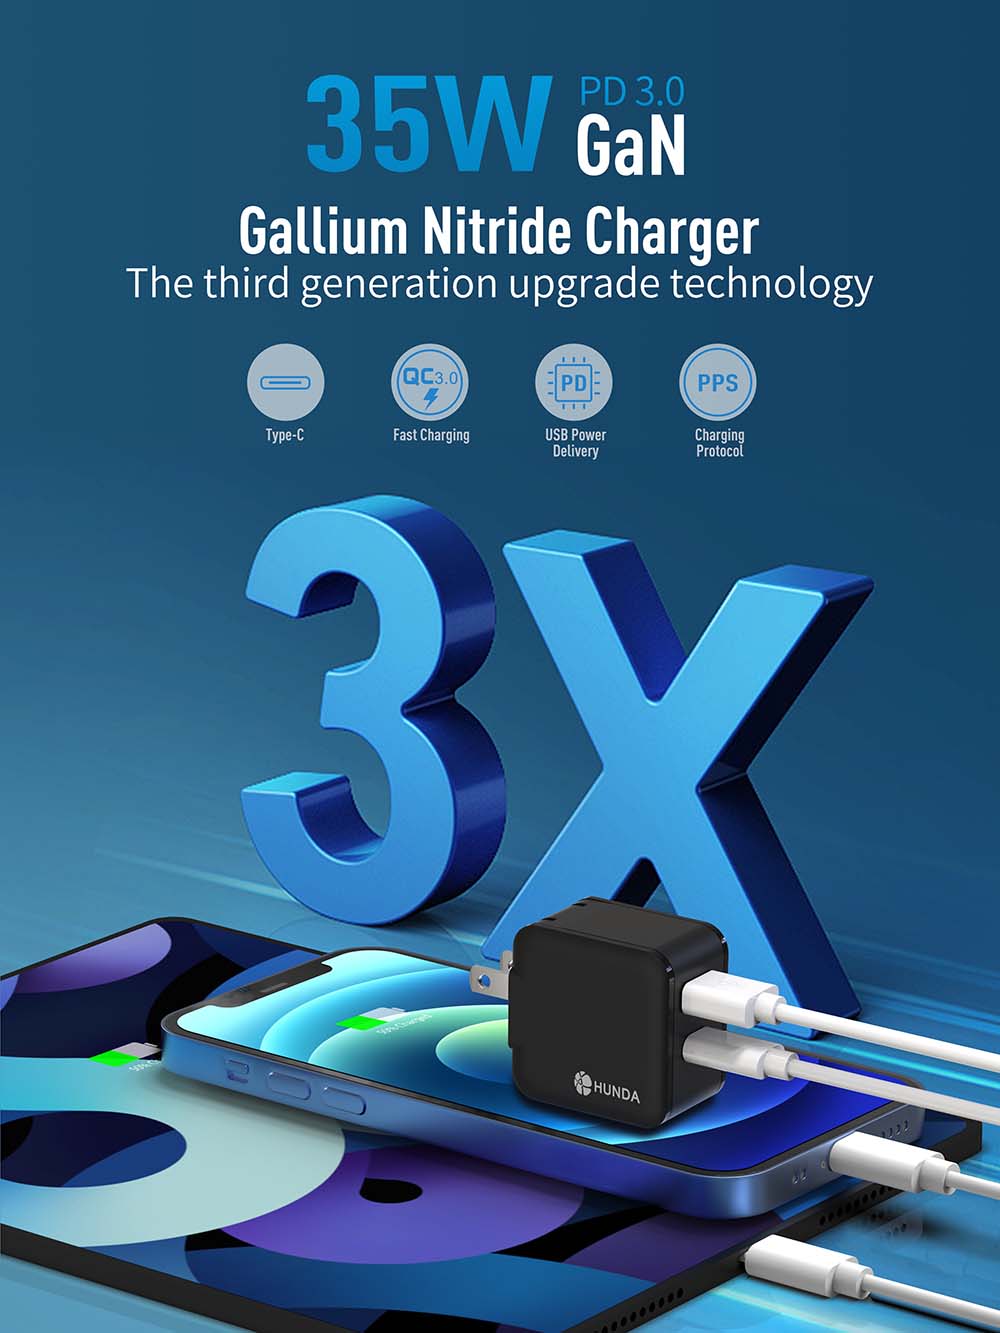 A2213-1(35W) GaN charger 3x faster than other chargers